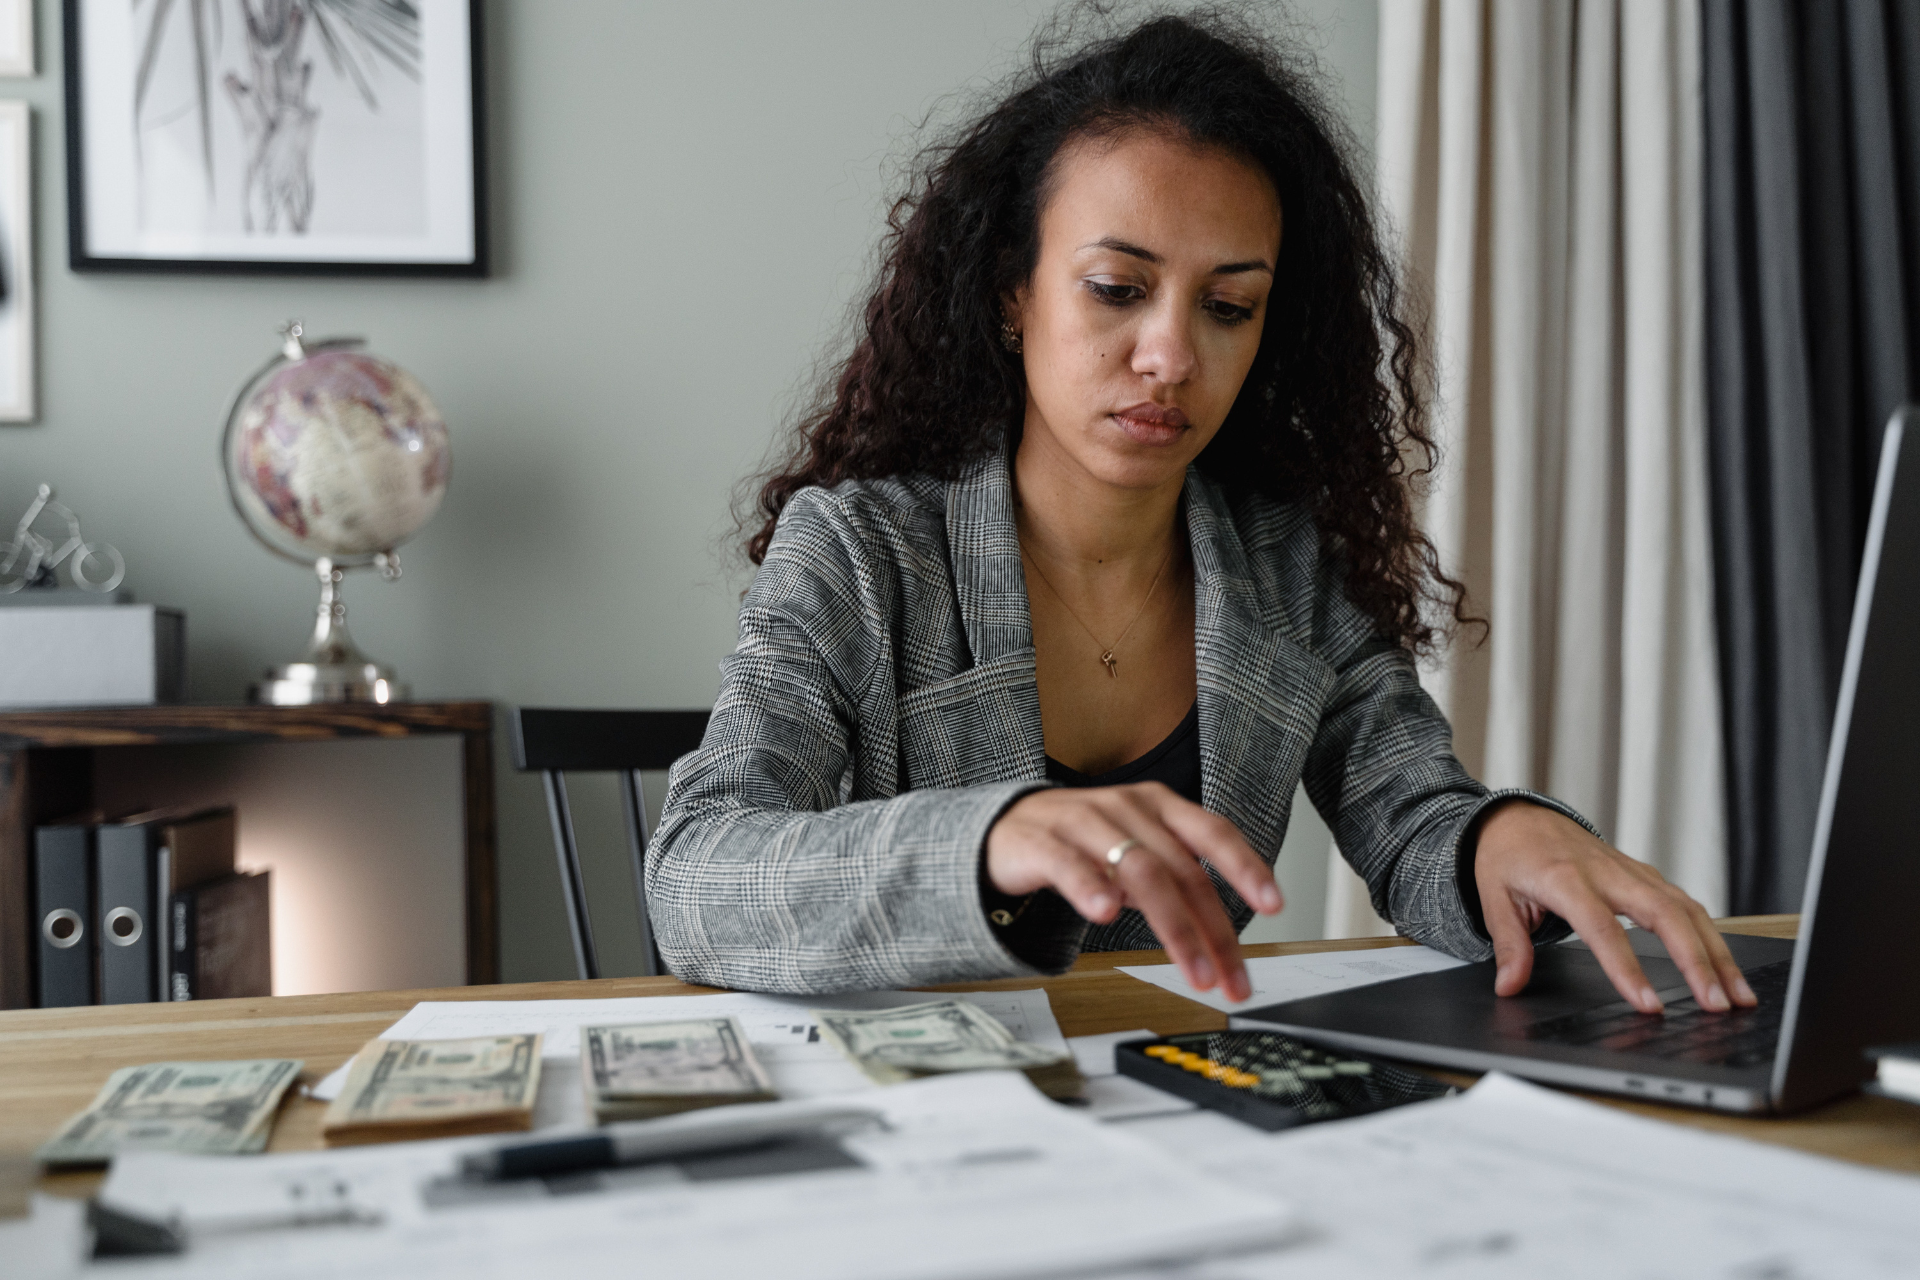 A woman sitting at a desk with her left hand on a laptop and her right hand on the phone's calculator. Next to her phone are dollar bills and in front of her are papers with notes. The woman is focused on calculating the cost of moving, including the security deposit deductions.